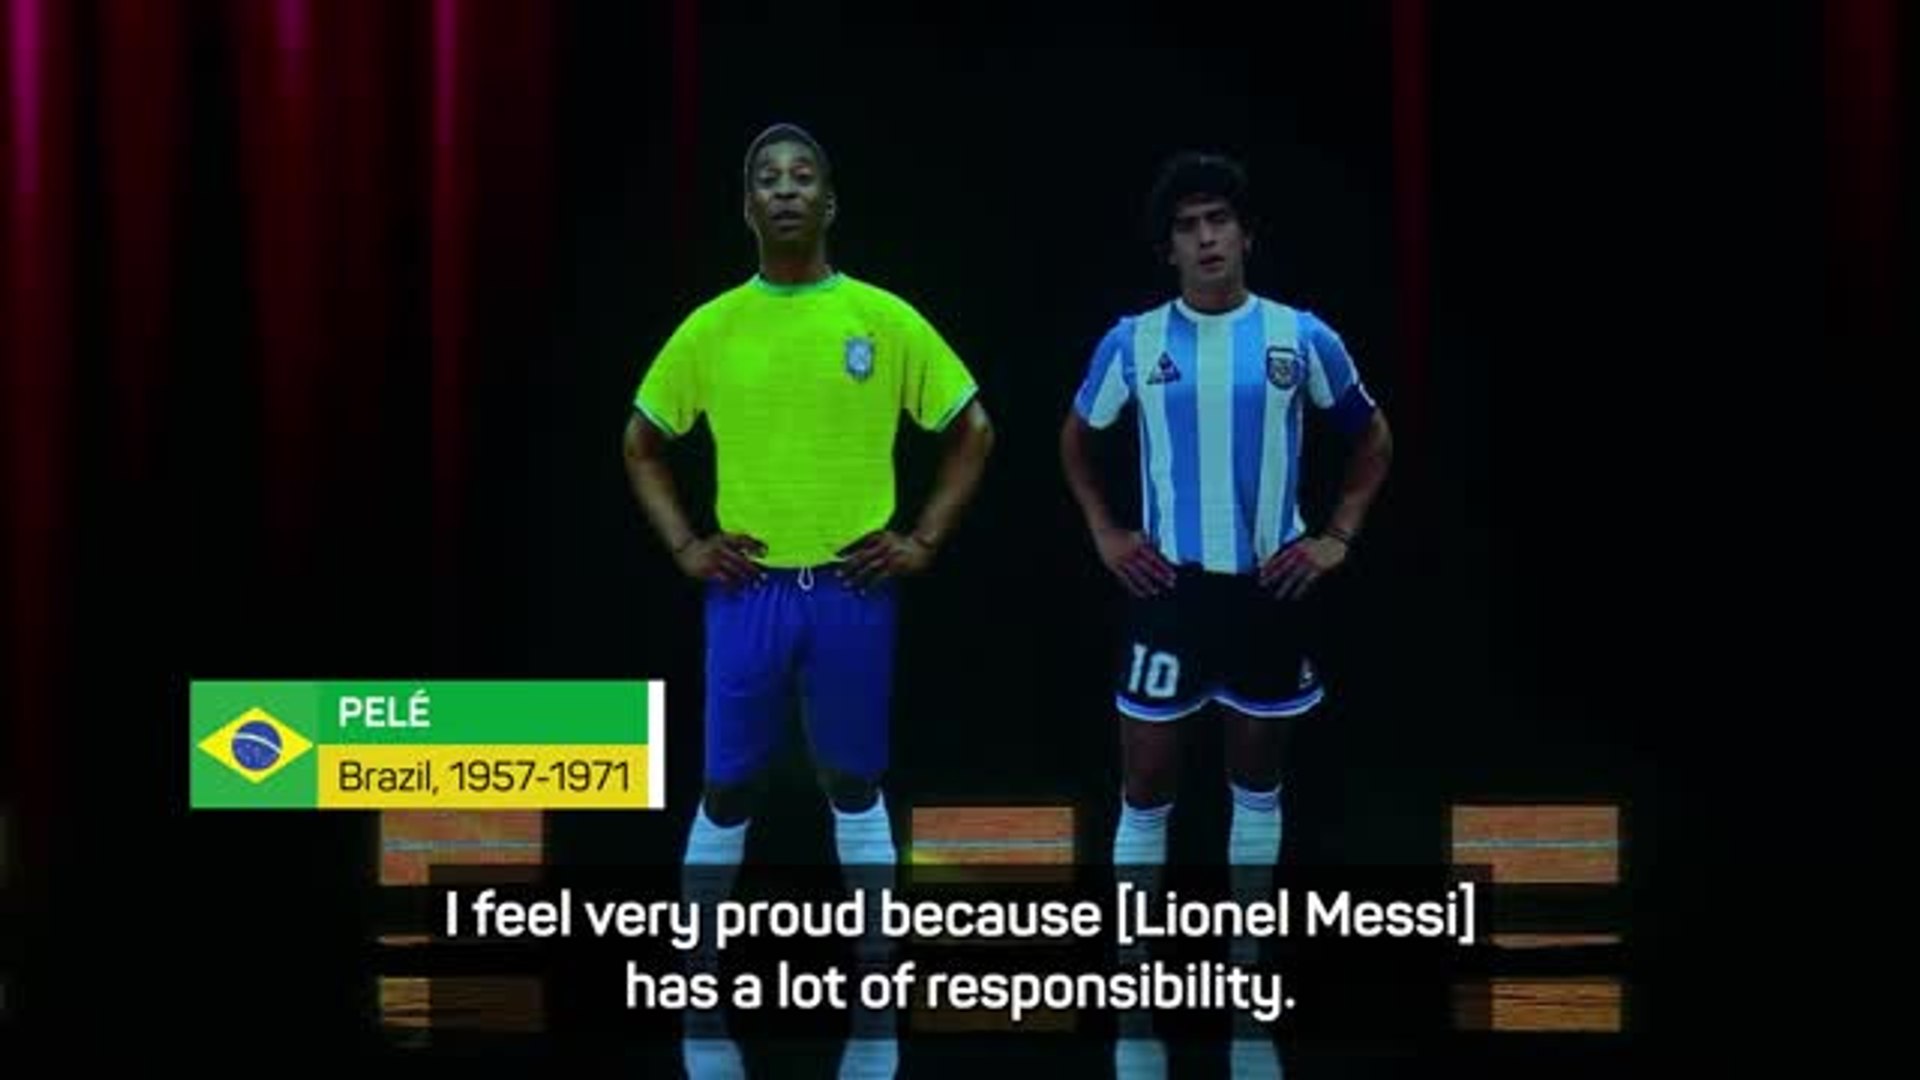 Pele and Maradona appear as holograms in Messi tribute - video